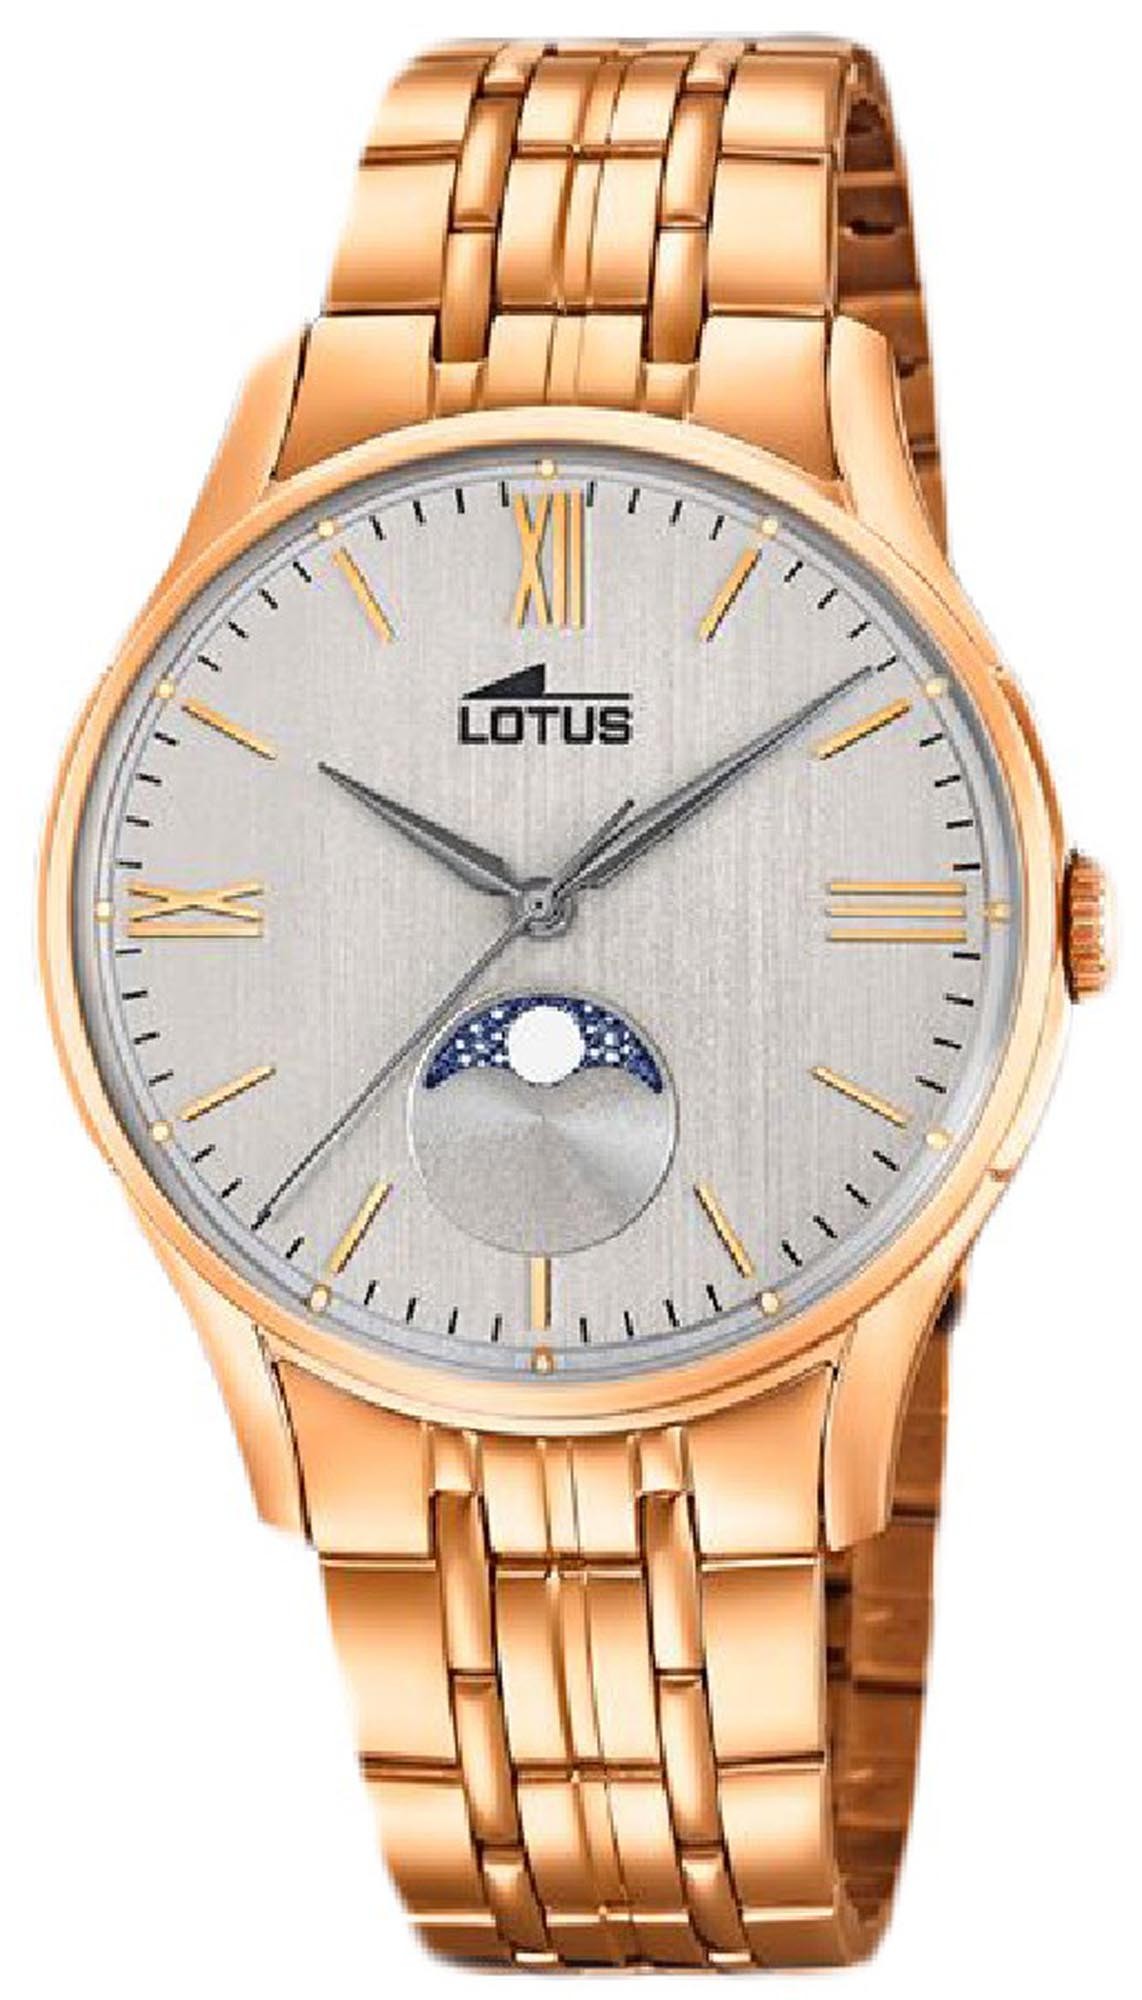 Lotus Men's Watch Lotus 18426/1 Watch with Round Case Analog Display Dial  and Golden Strap 150802 18426/1 Comprar Watch Lotus 18426/1 Watch with  Round Case Analog Display Dial and Golden Strap